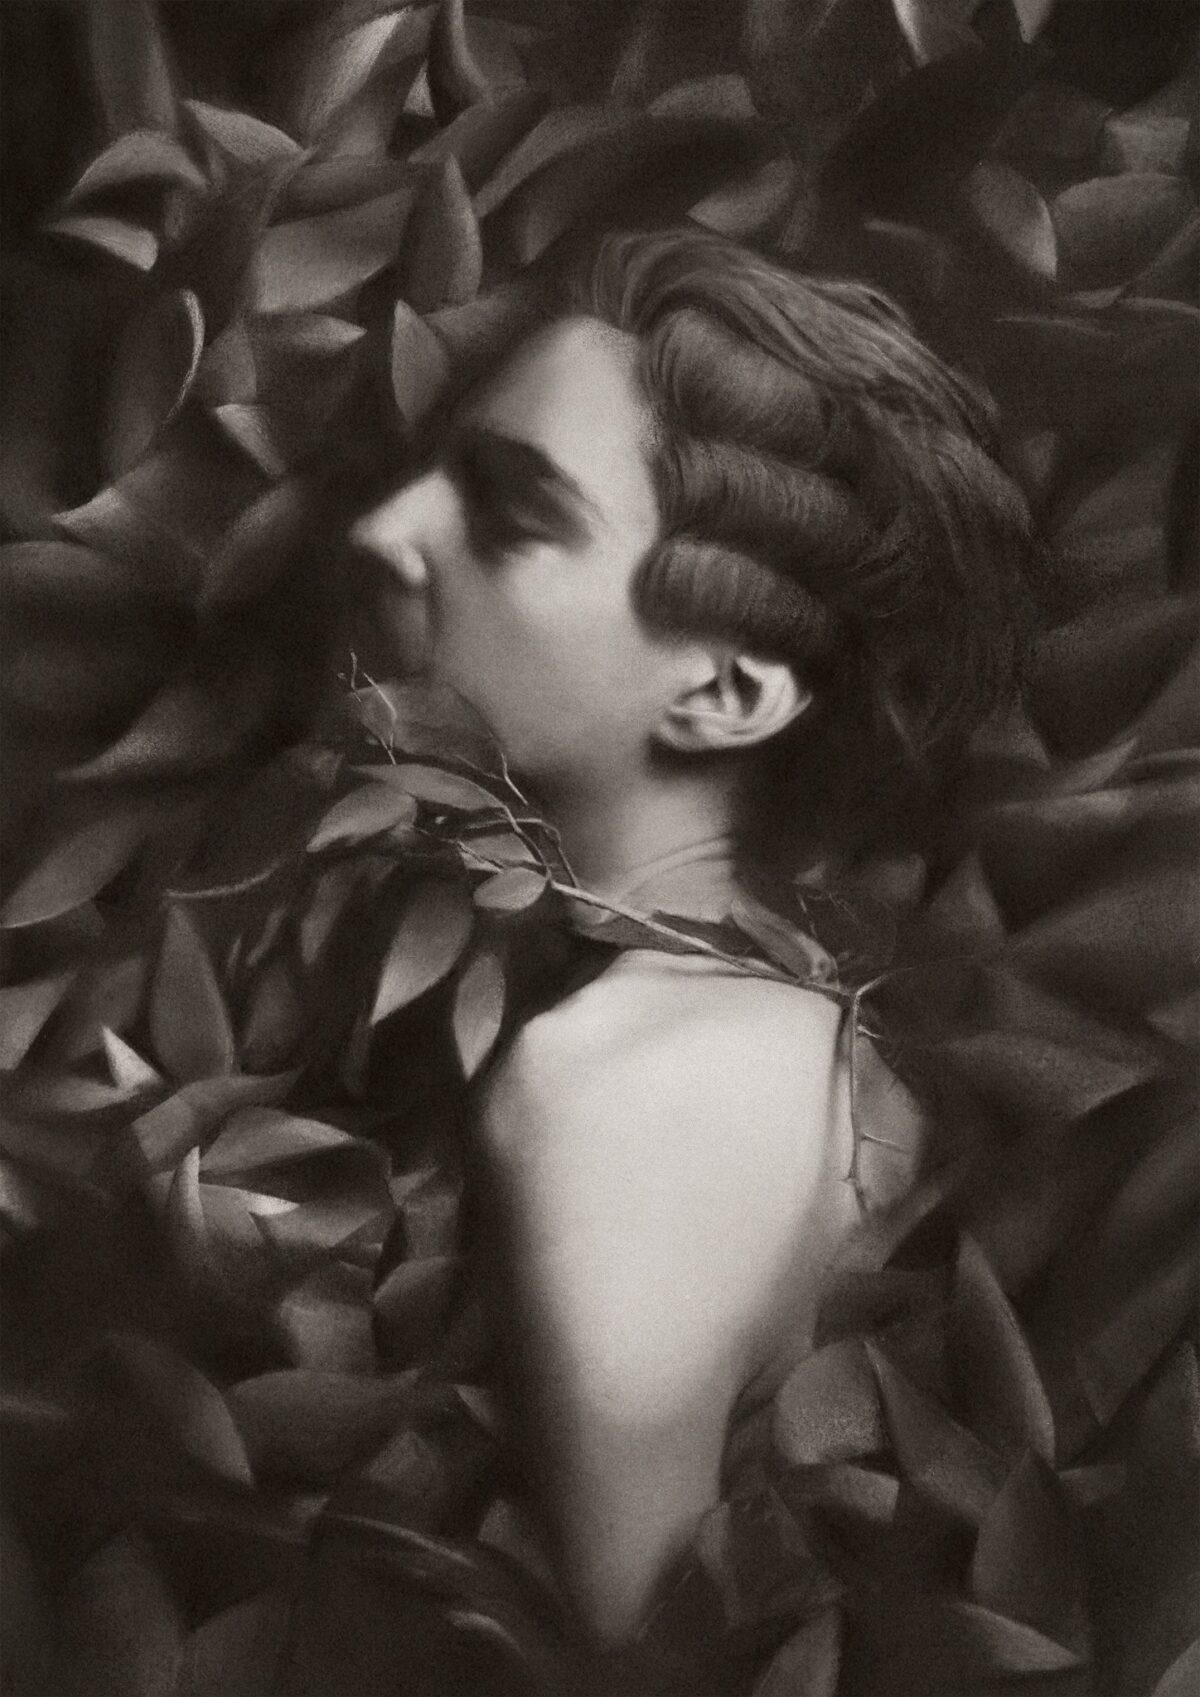 Intimate And Thoughtful Black And White Illustrations By Marco Palena 5